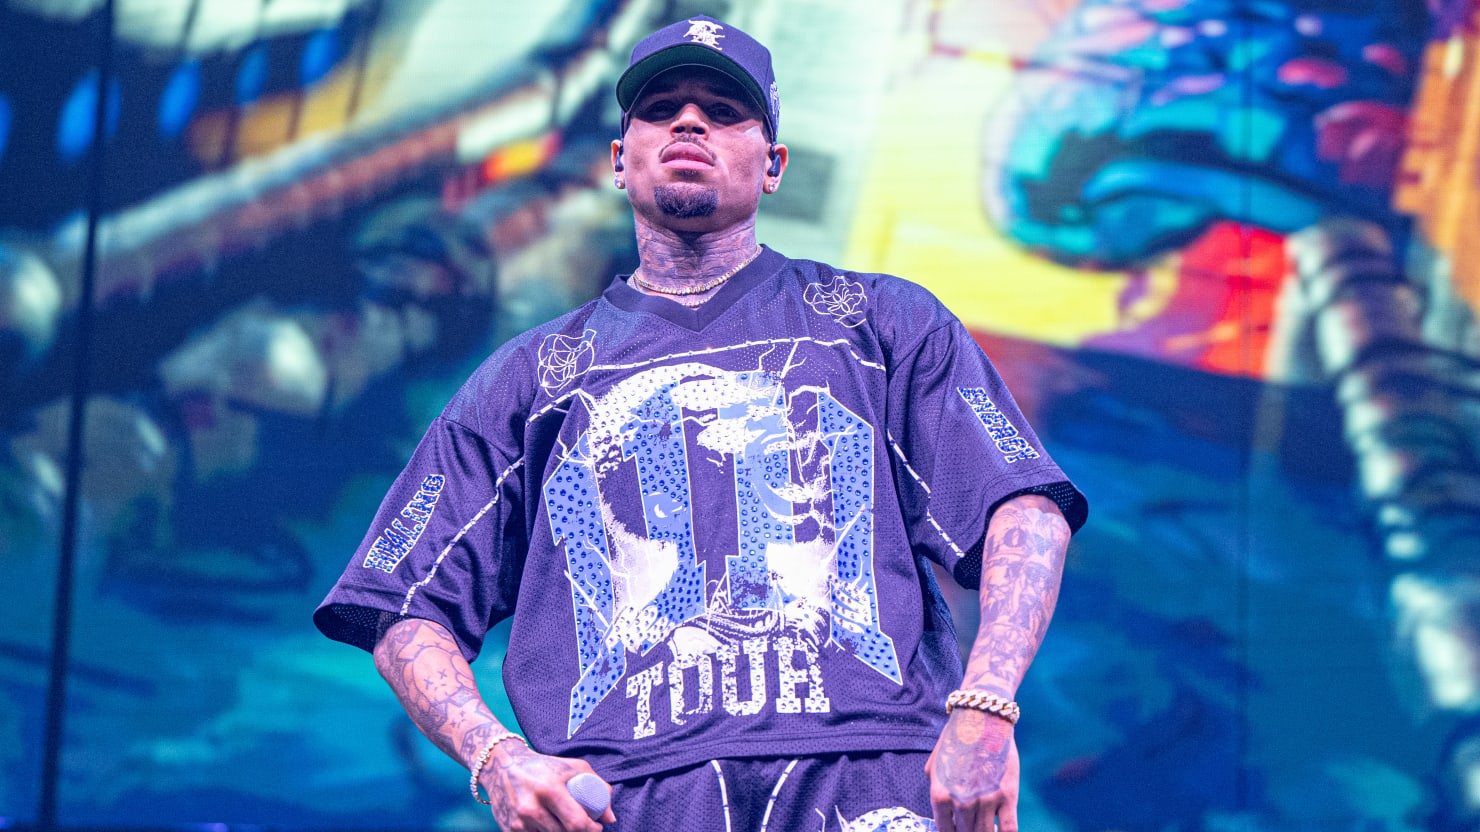 Chris Brown is accused of attacking his own concertgoers